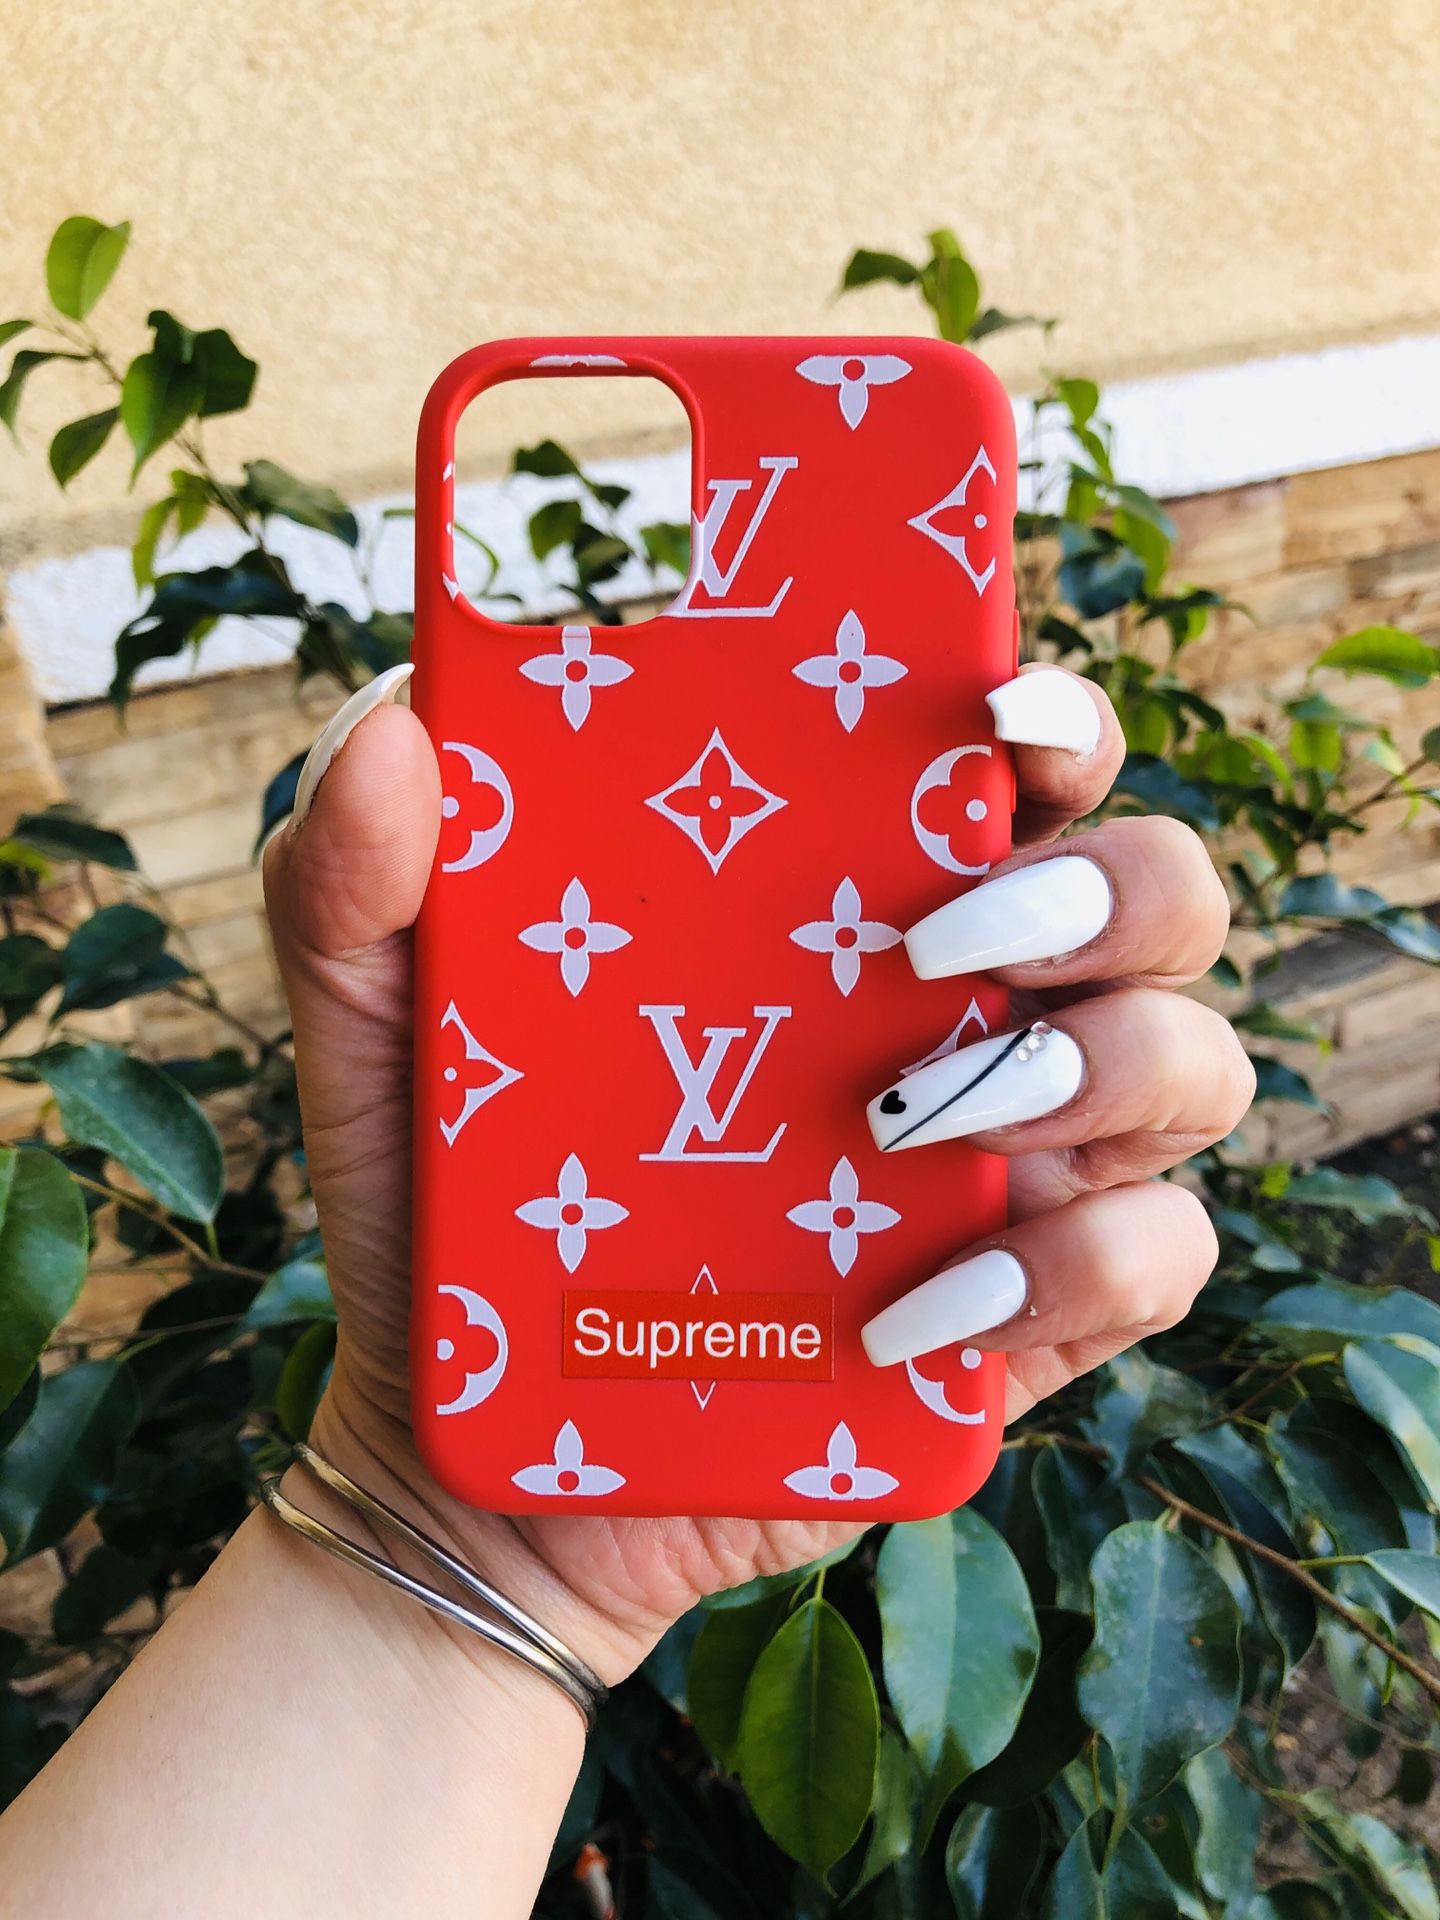 Brand new cool iphone 11 PRO case cover rubber red supreme designer fashion mens guys hypebeast hypebae womens girls hype swag